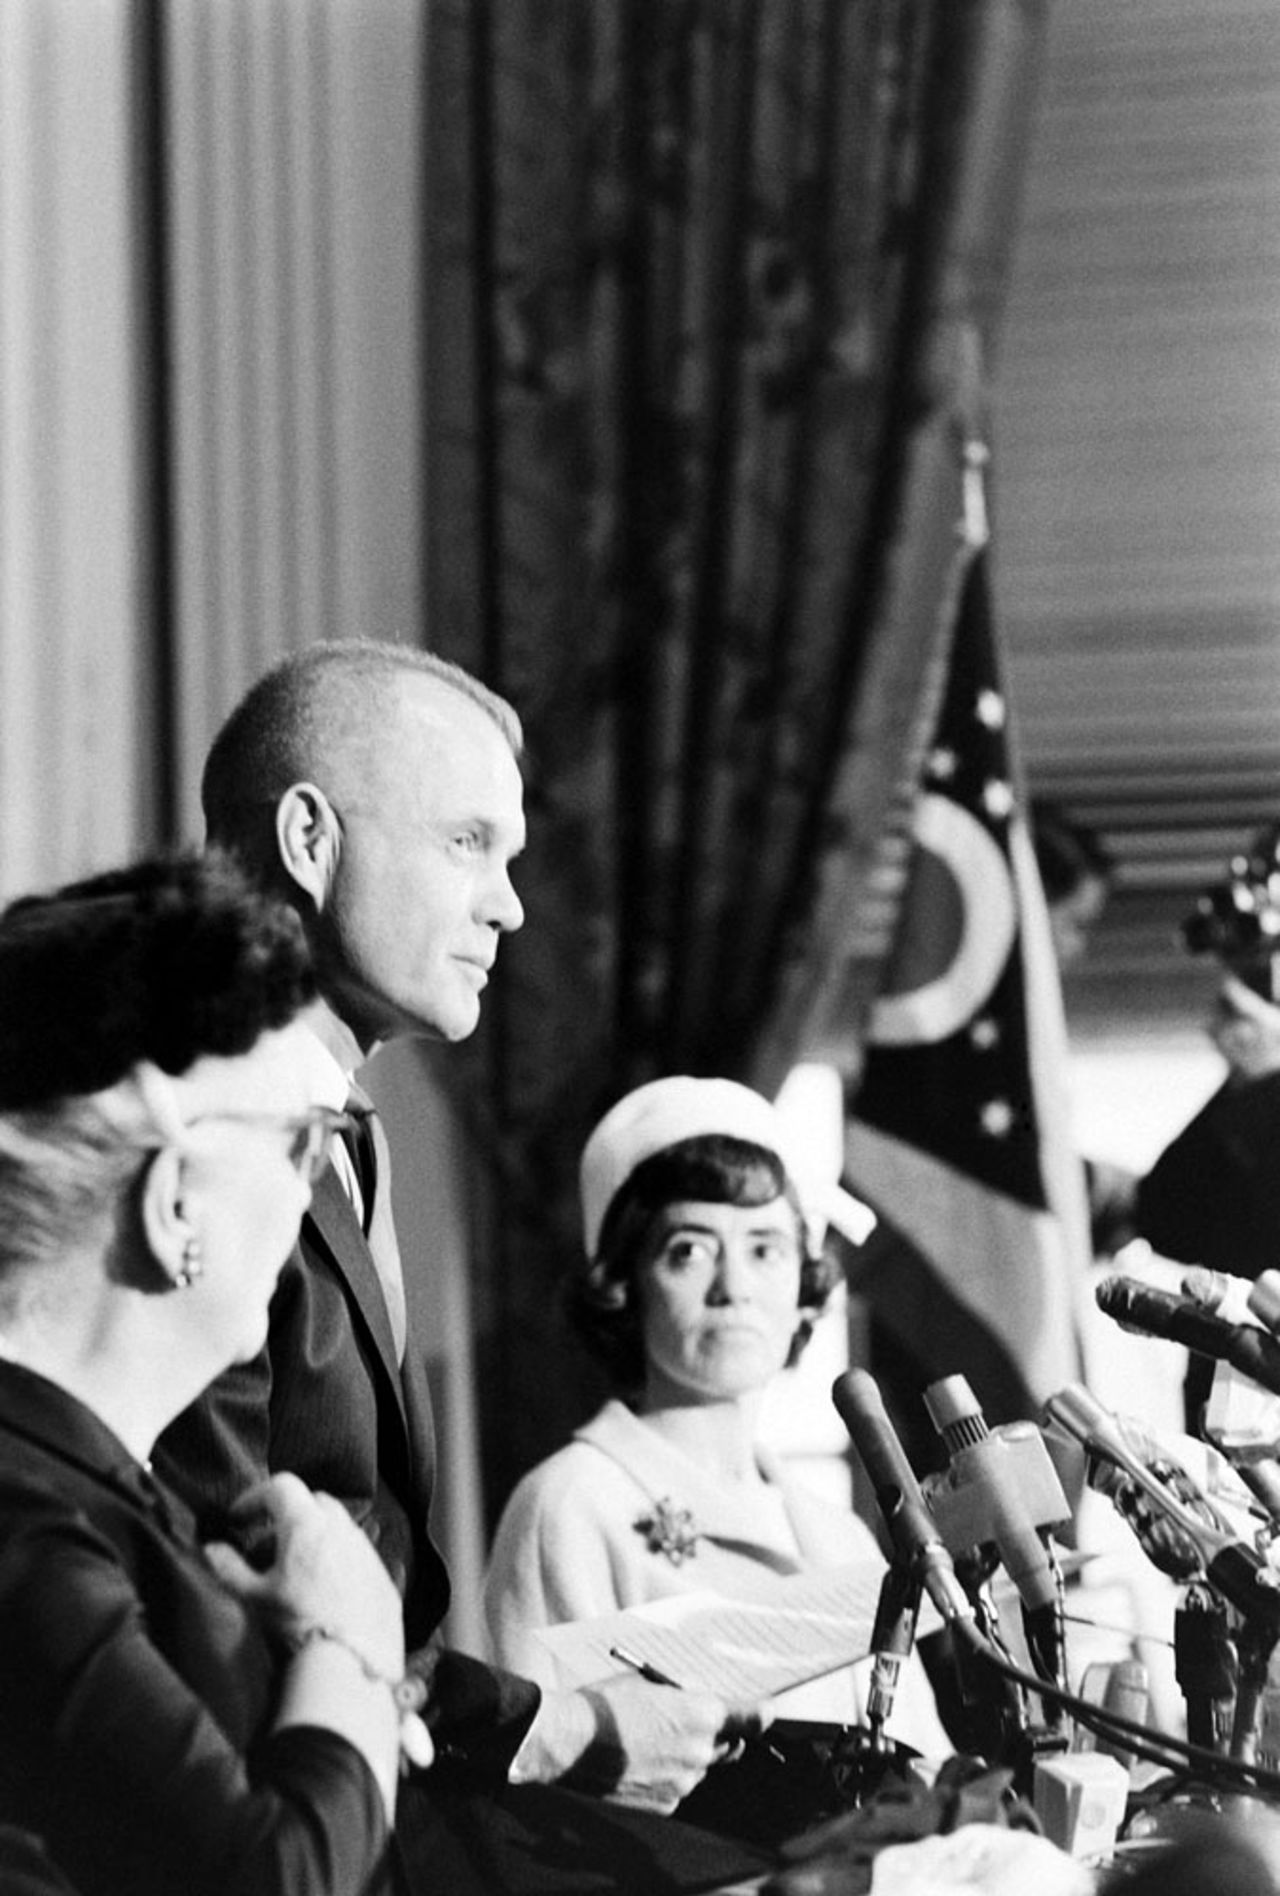 Glenn announces his candidacy for US Senate in 1964. "In his only previous contacts with high-level politicians of both parties," Life magazine wrote, "Glenn has been the object of admiration and affection; for the people in general he has been virtually above reproach. Now, suddenly, his hero's immunity is gone. He must stand still for hard looks and hard questions by men who have long studied all the answers."